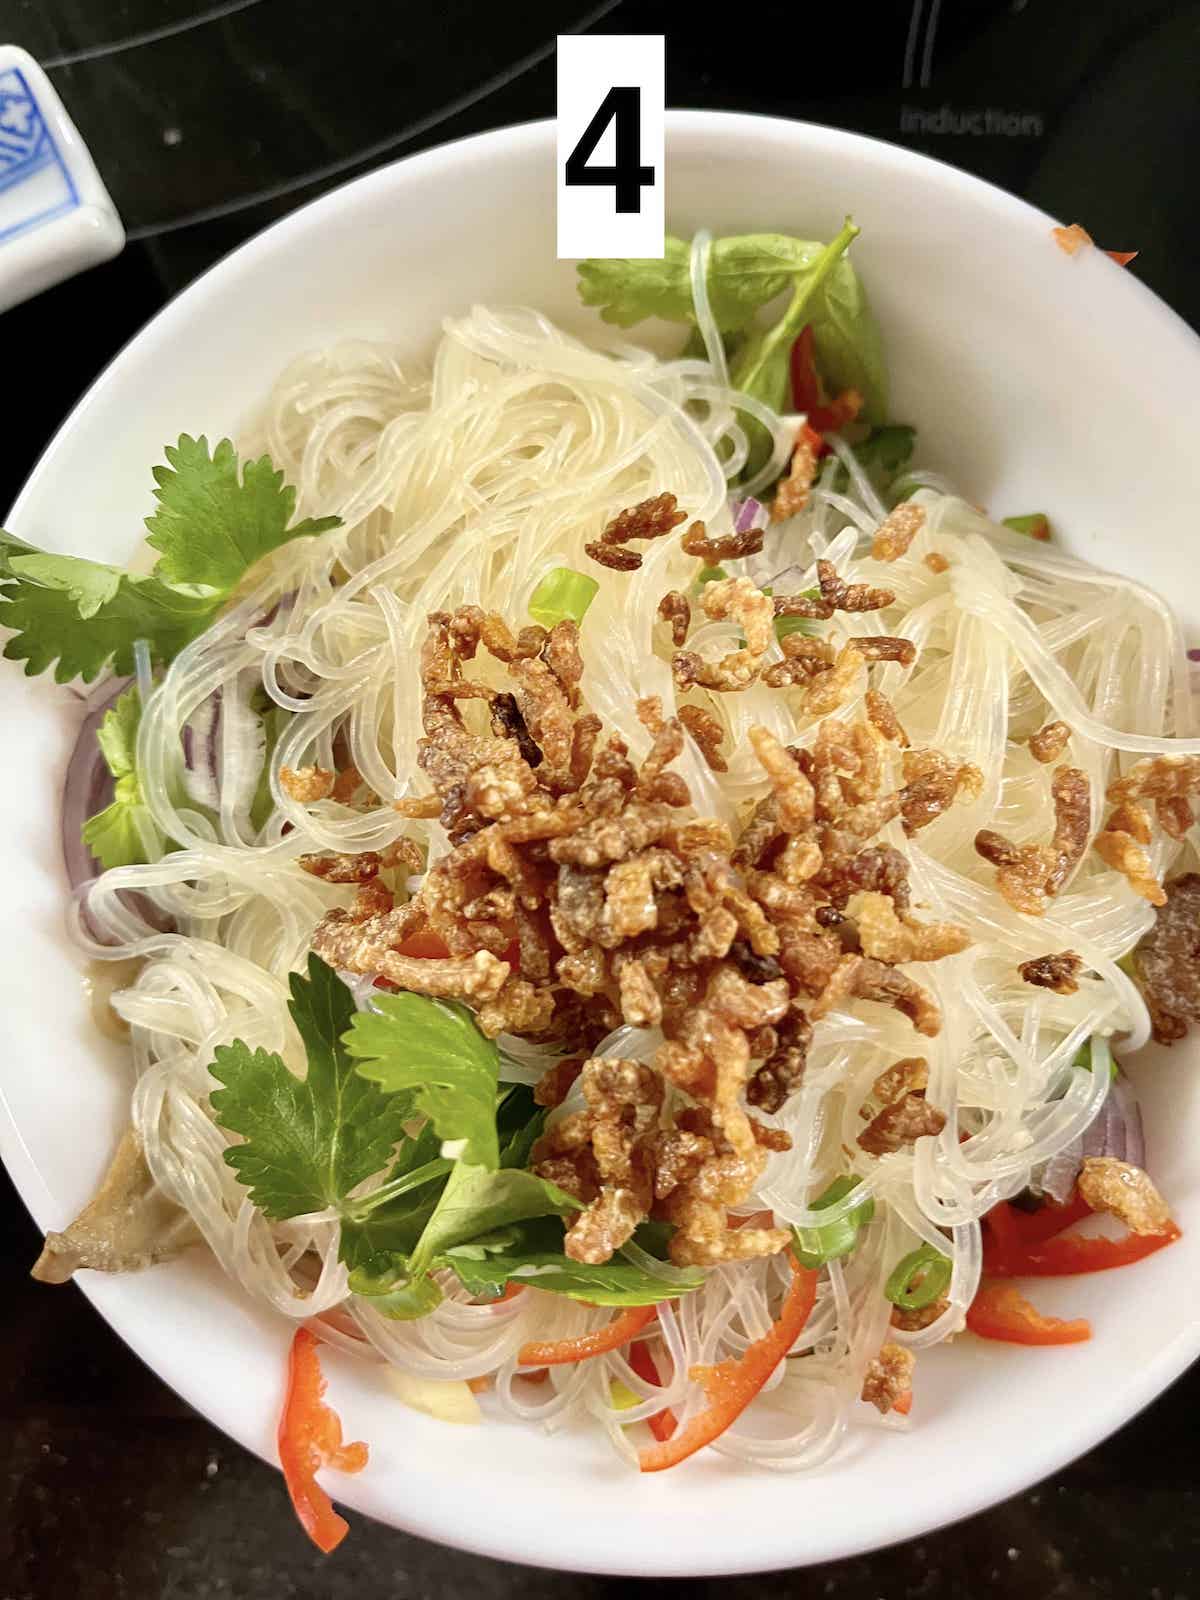 A bowl of glass noodles mixed with coriander, chili, spring onions and dried shrimp.